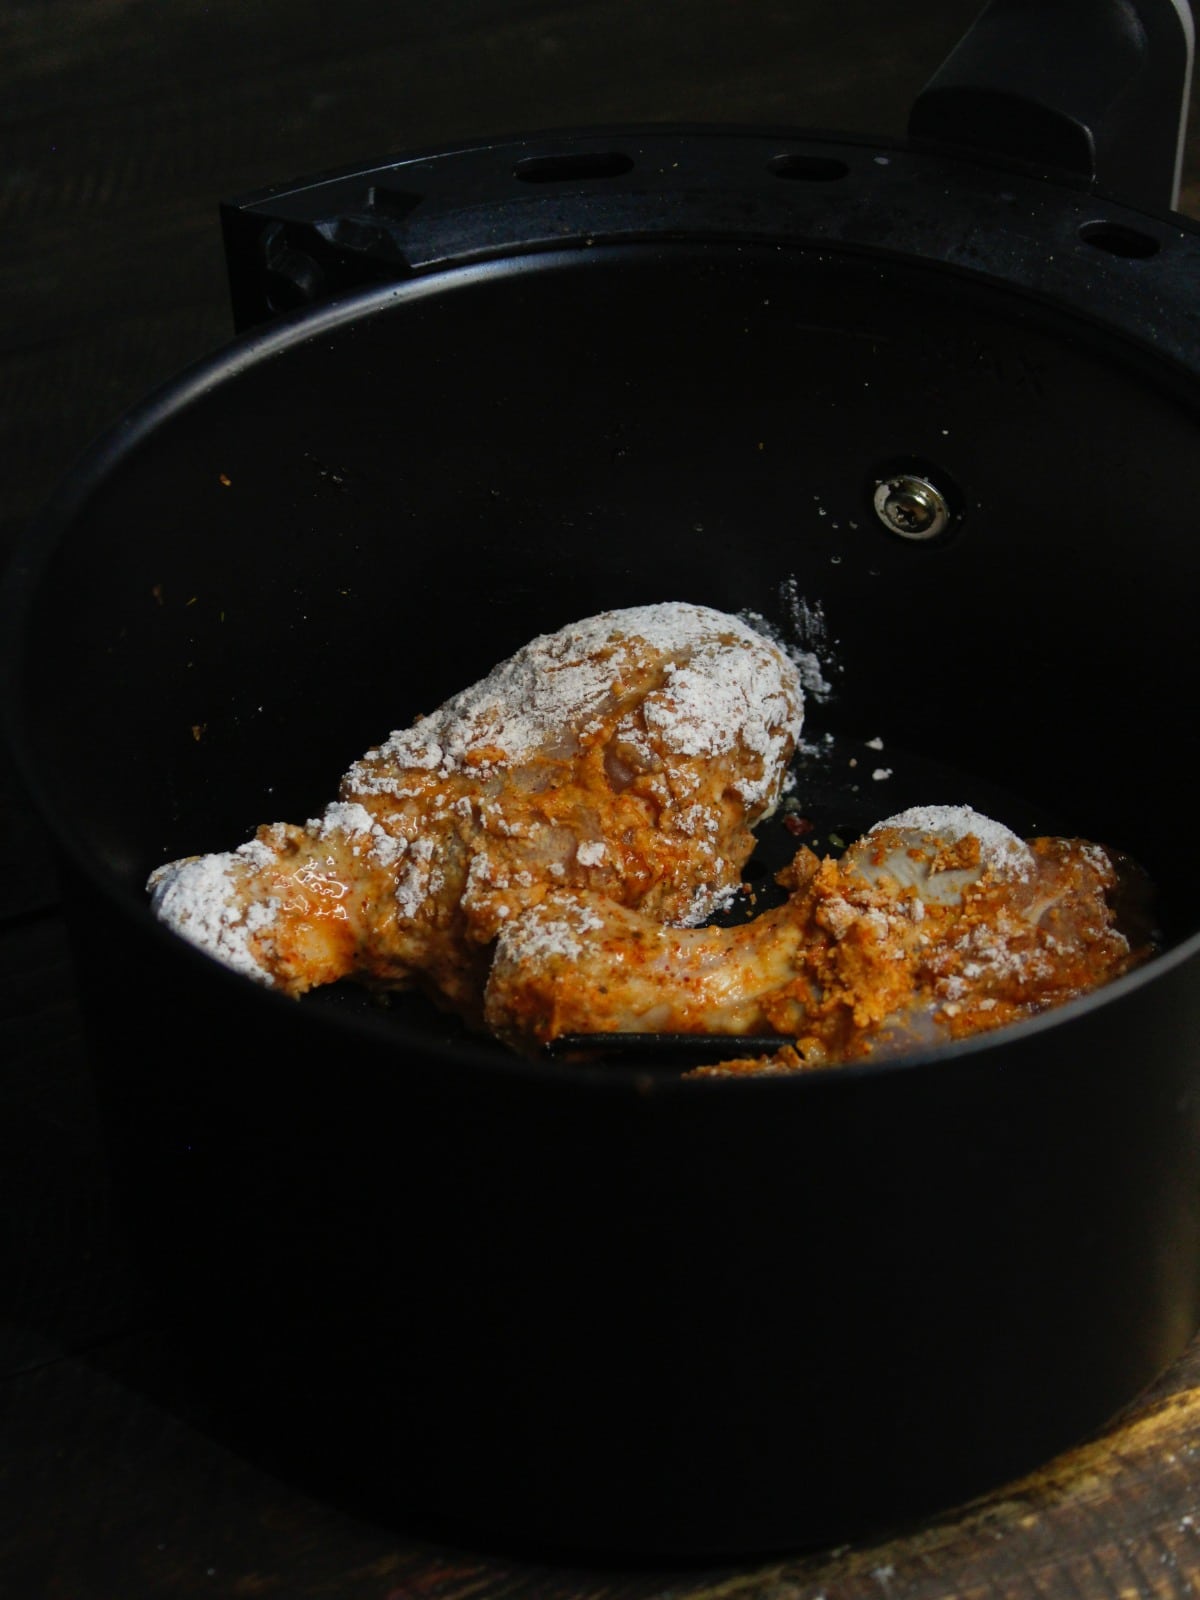 Transfer the chicken into the air fryer basket and spray some oil over it